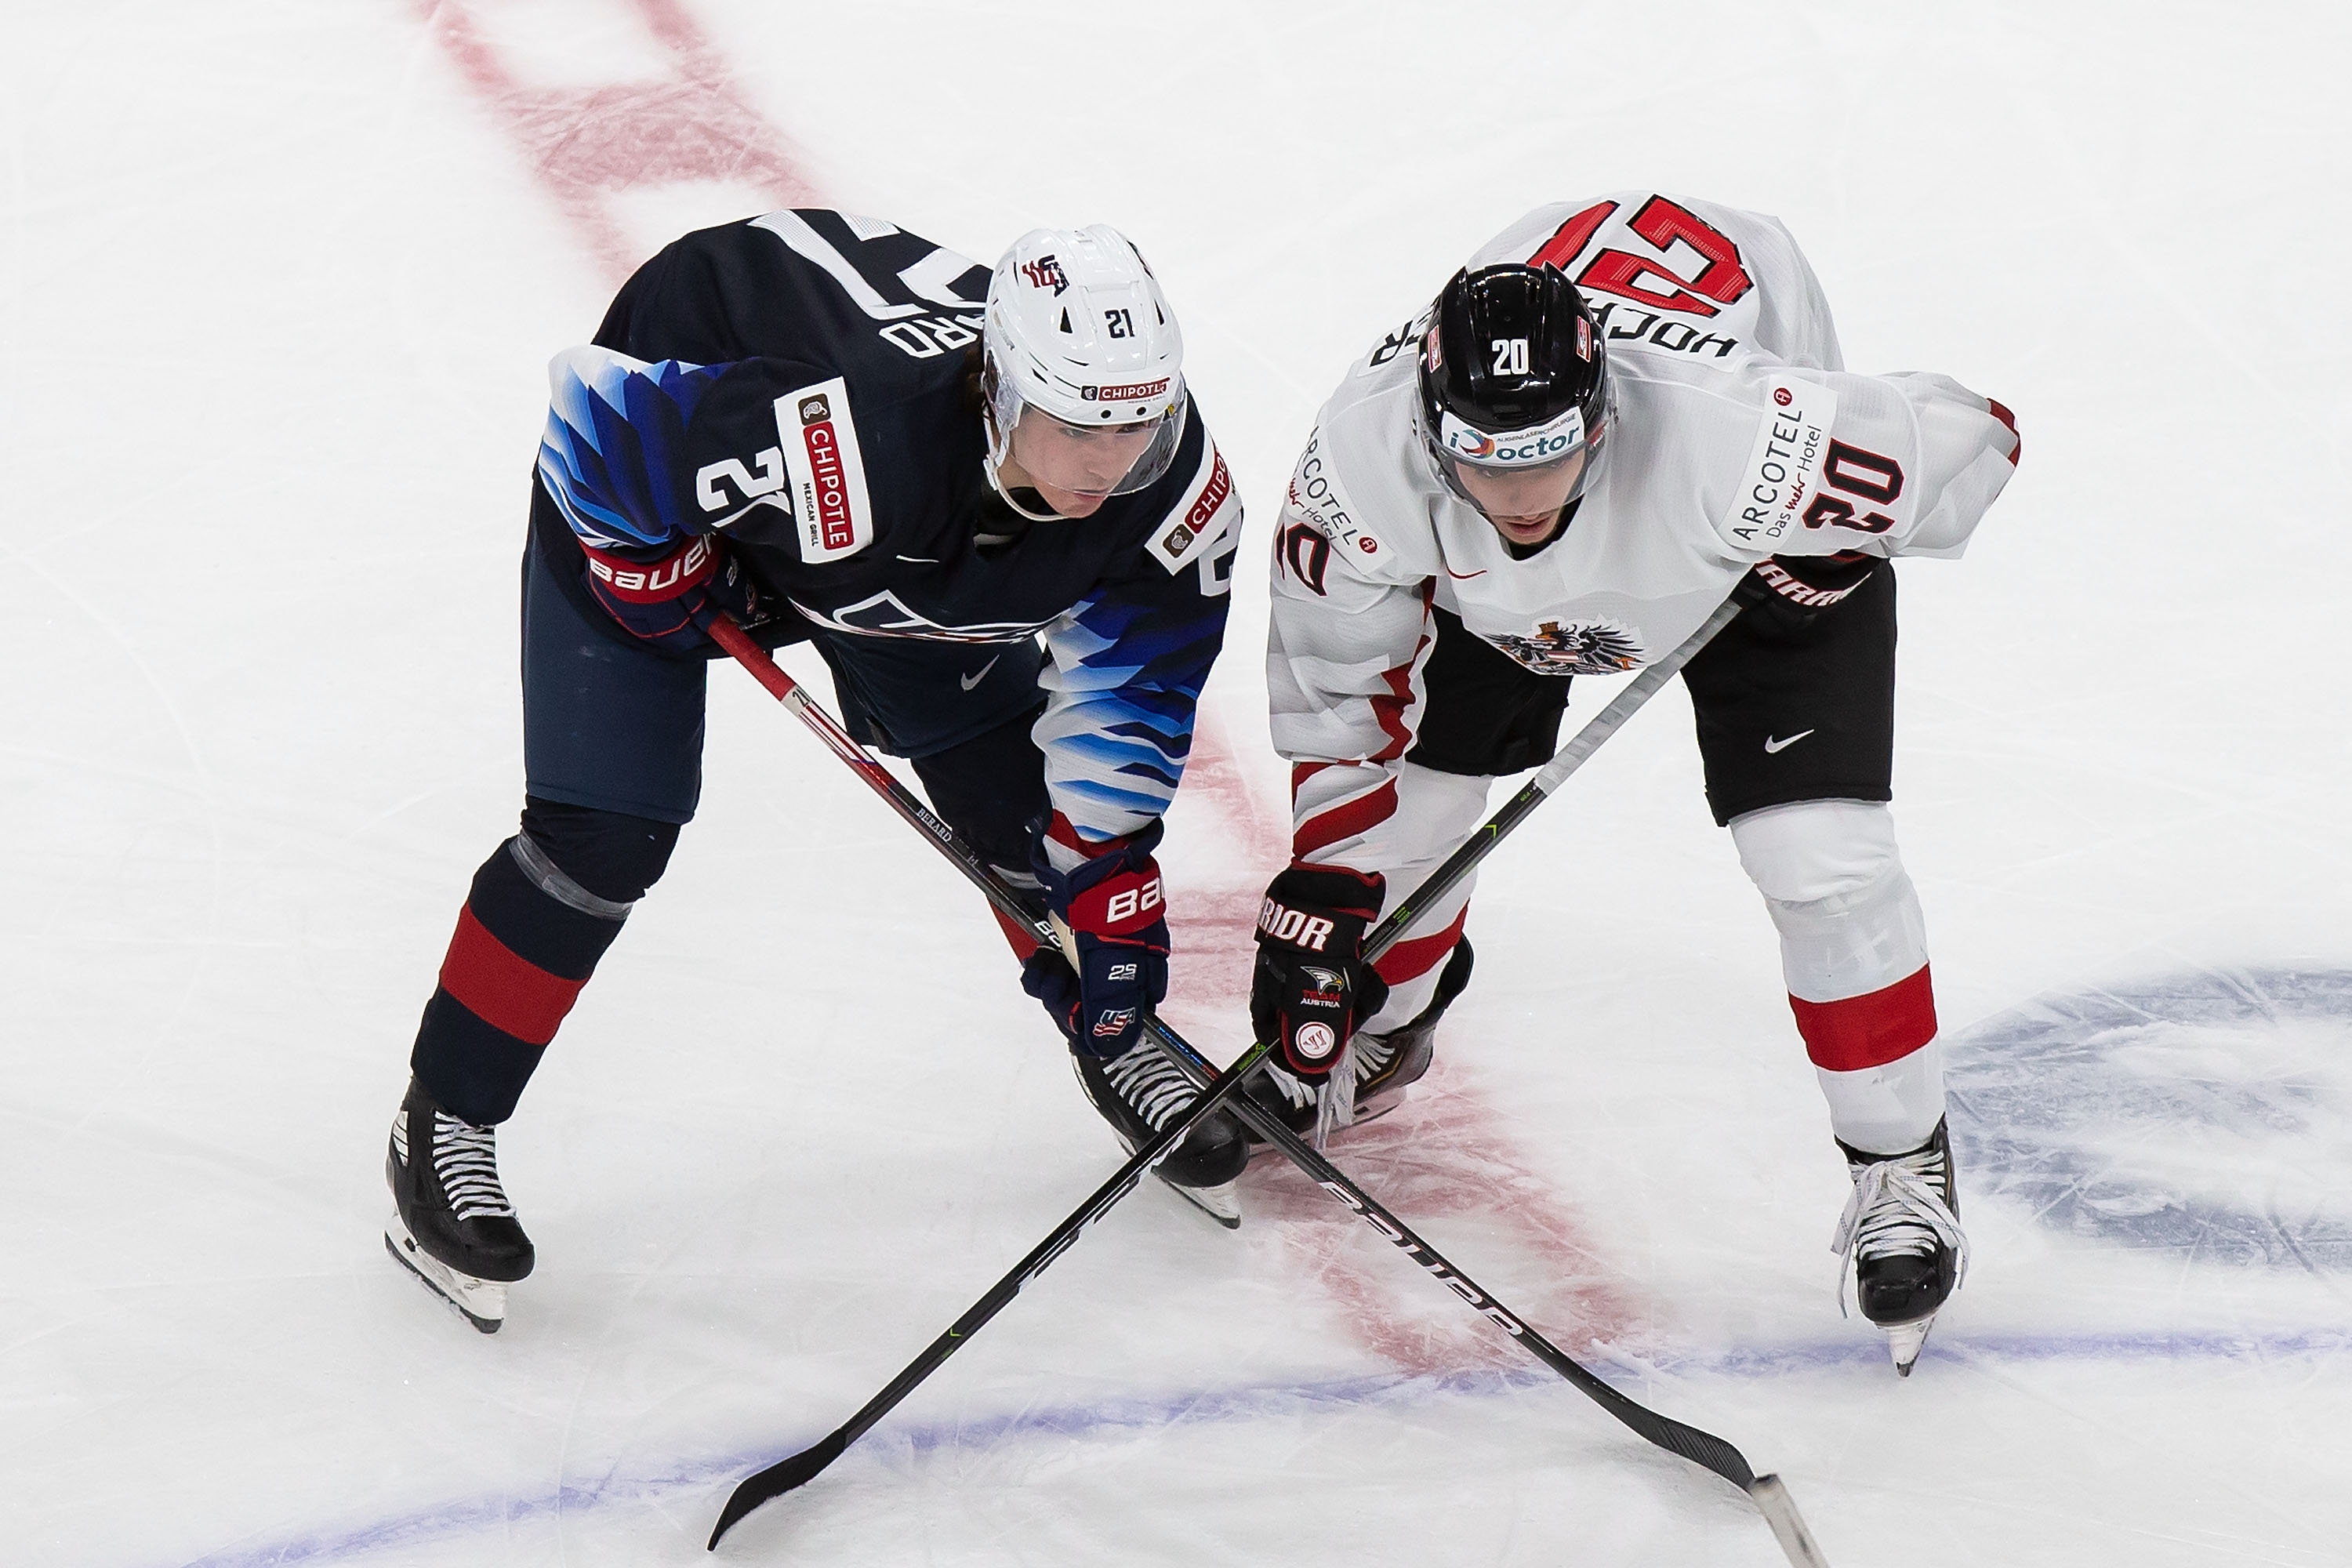 Brett Berard #21 of the United States lines up next to Fabian Hochegger #20 of Austria during the 2021 IIHF World Junior Championship at Rogers Place on December 26, 2020 in Edmonton, Canada.